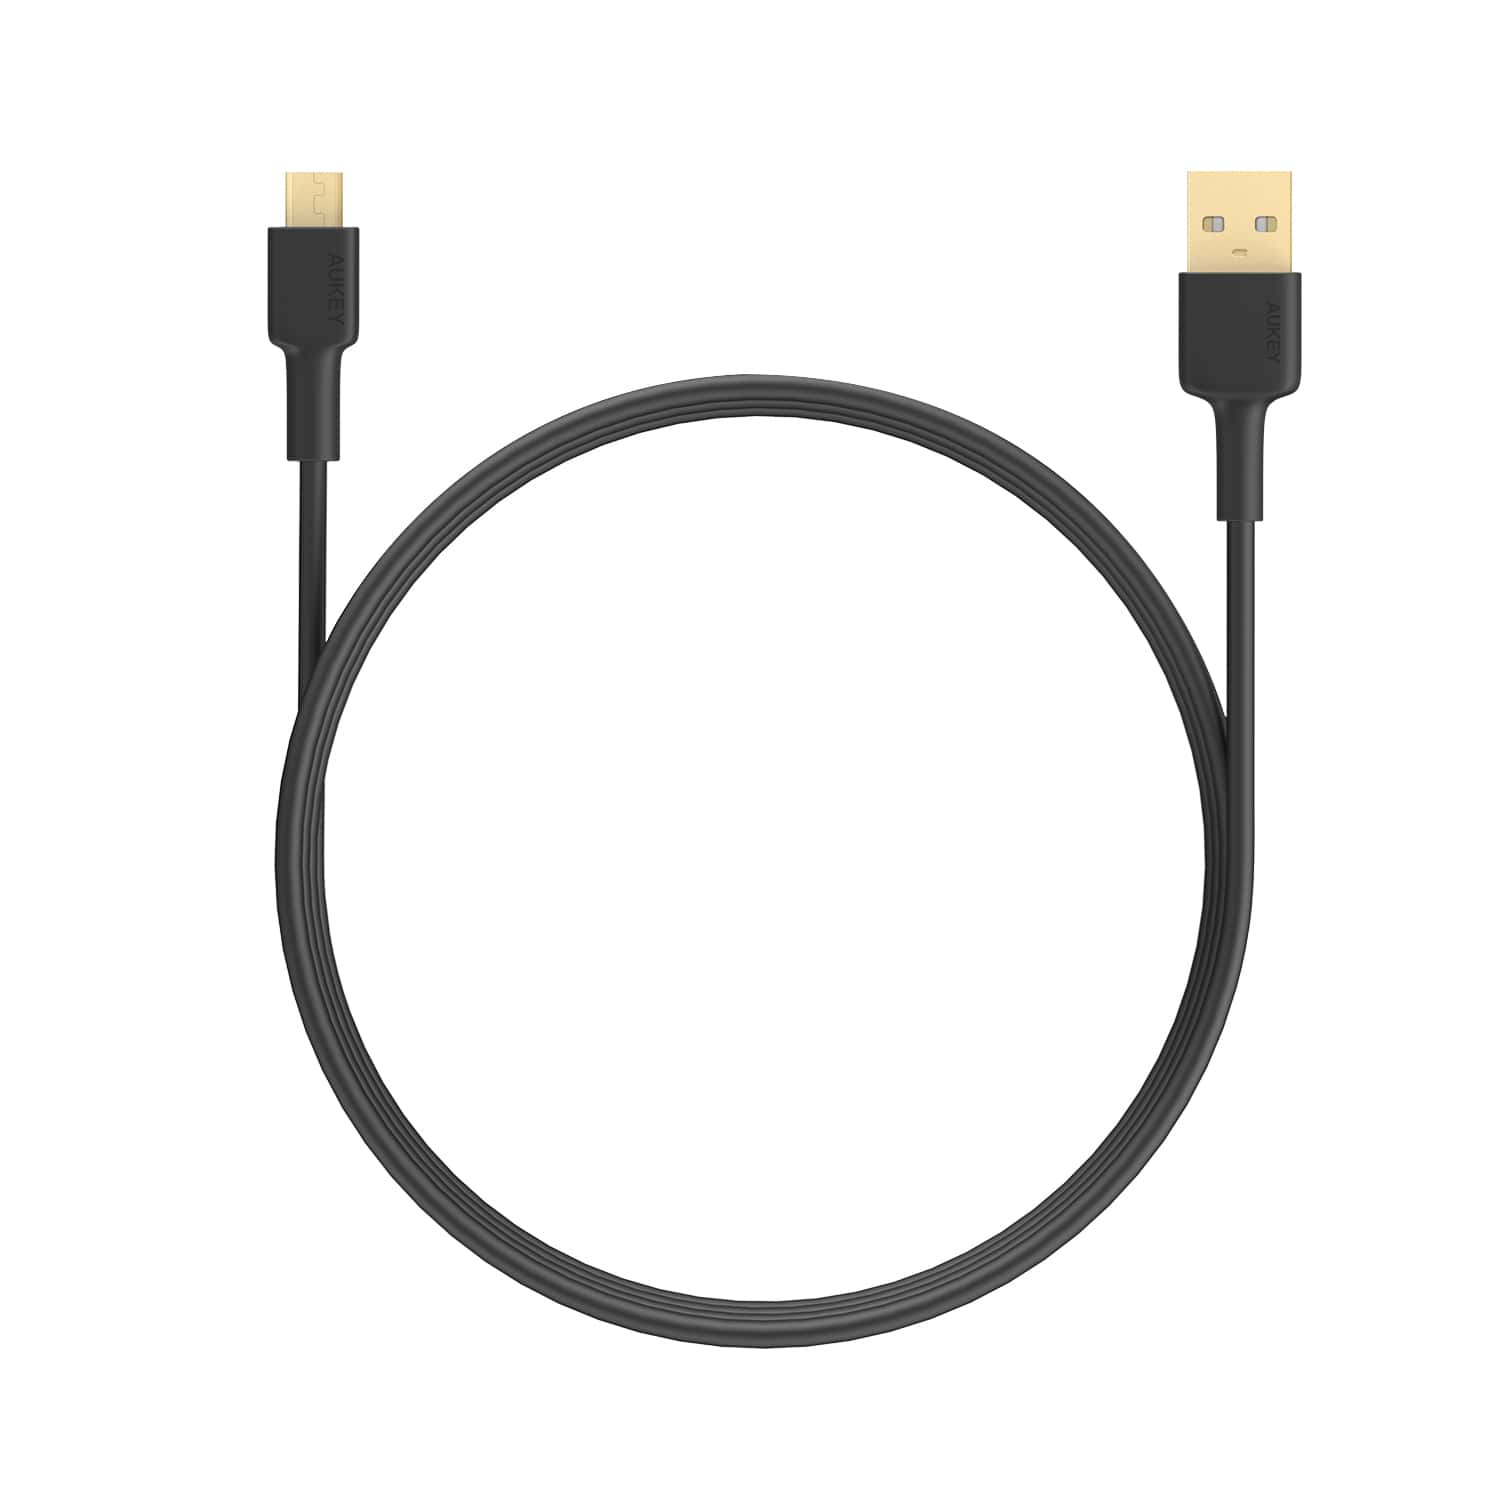 Aukey, USB 2.0 to Micro USB Cable (2m / 6.6ft) - Black -   CB-MD2 BK